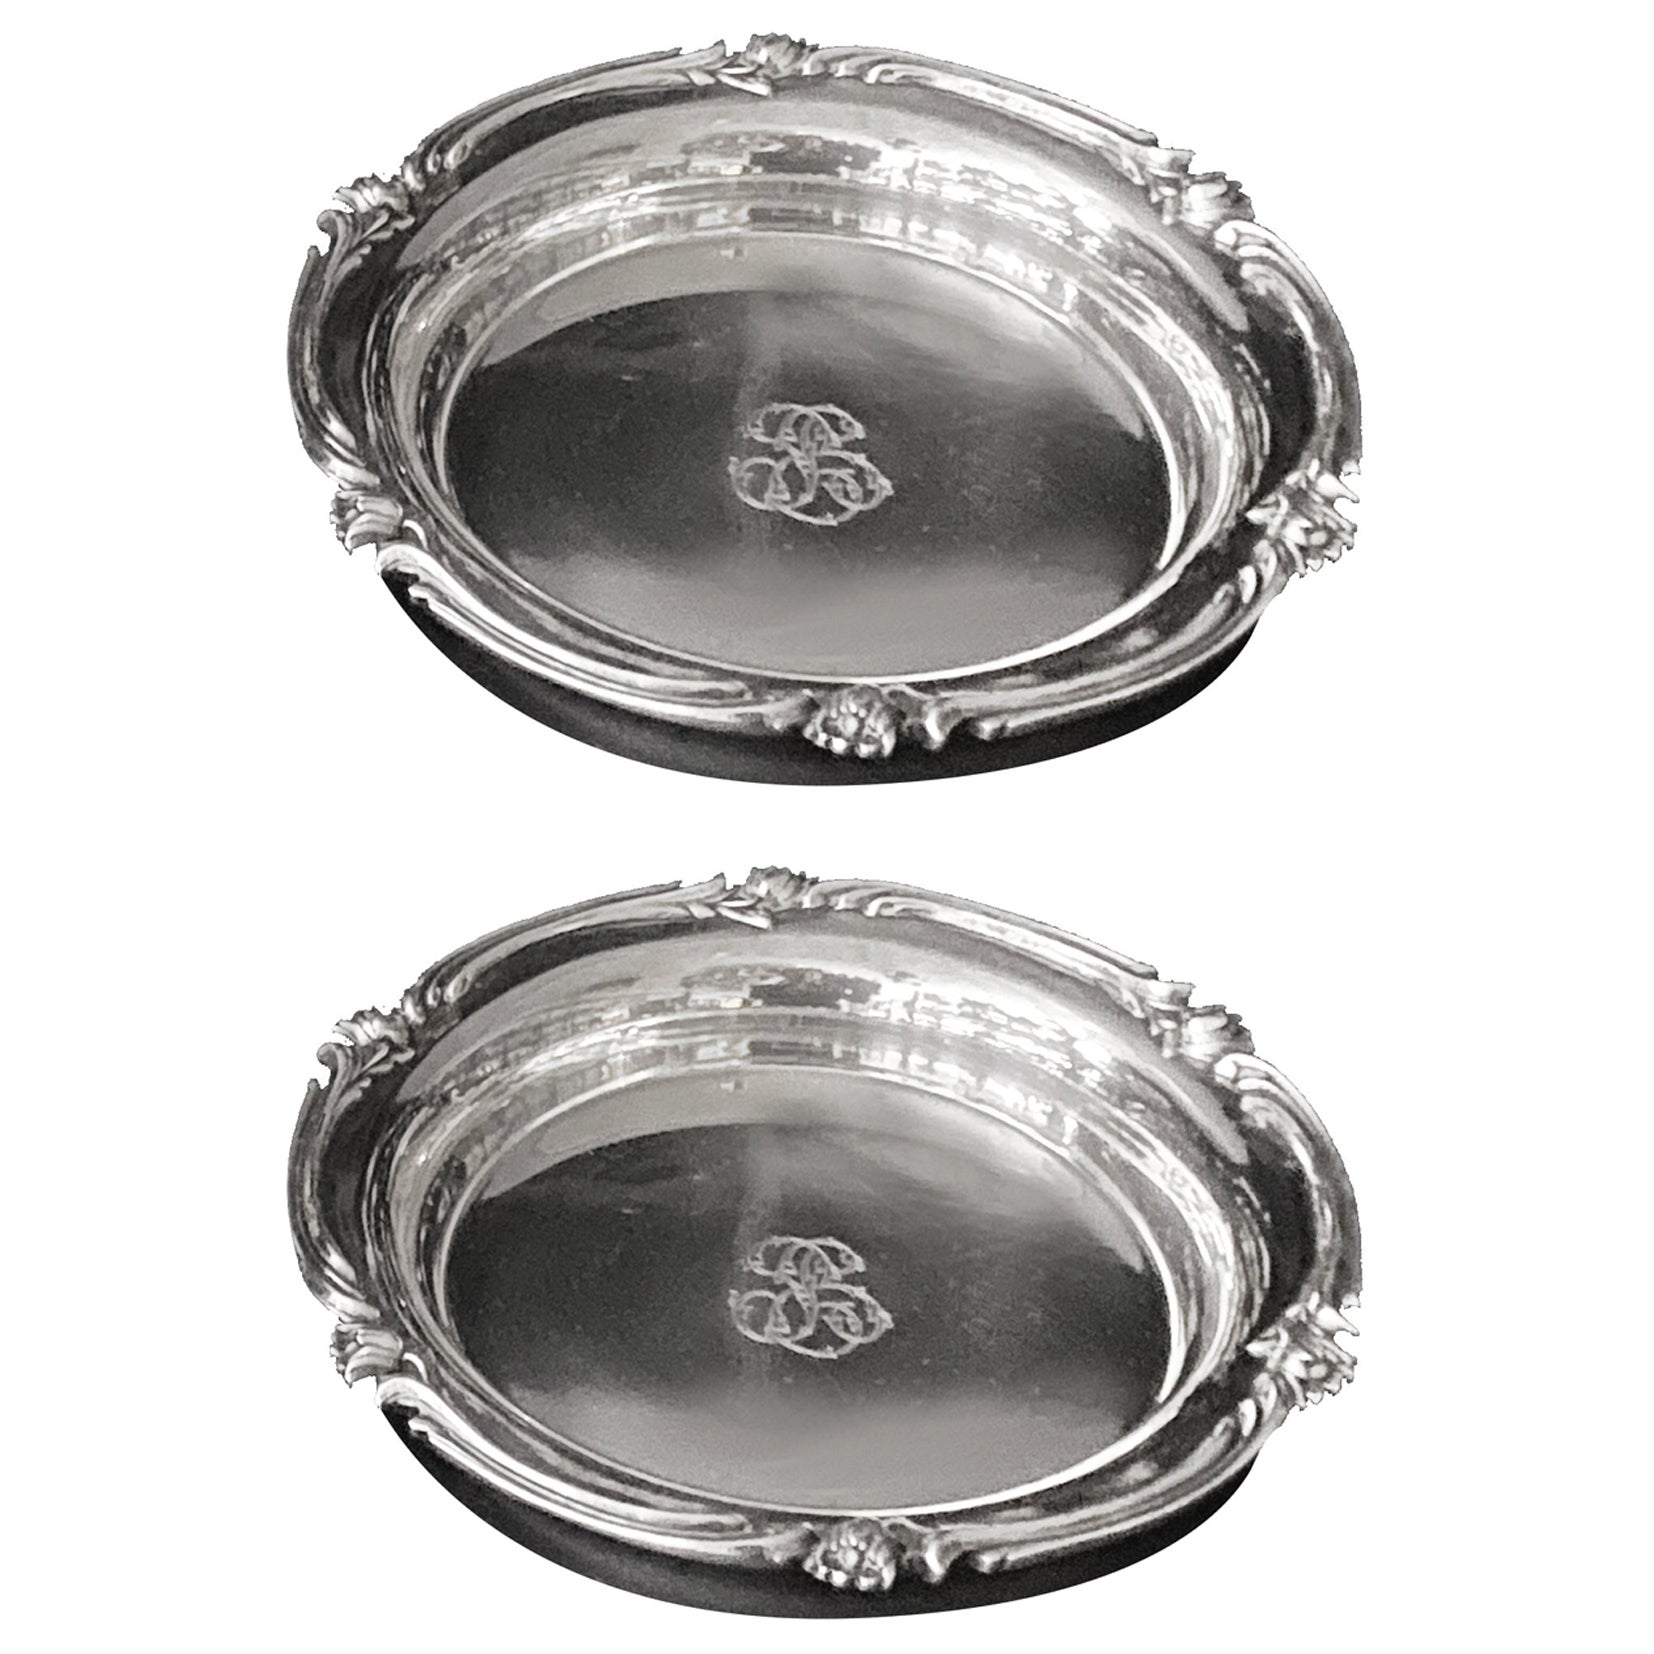 Set of 2 Old Christofle Coaster Silver Plated, circa 1880 For Sale